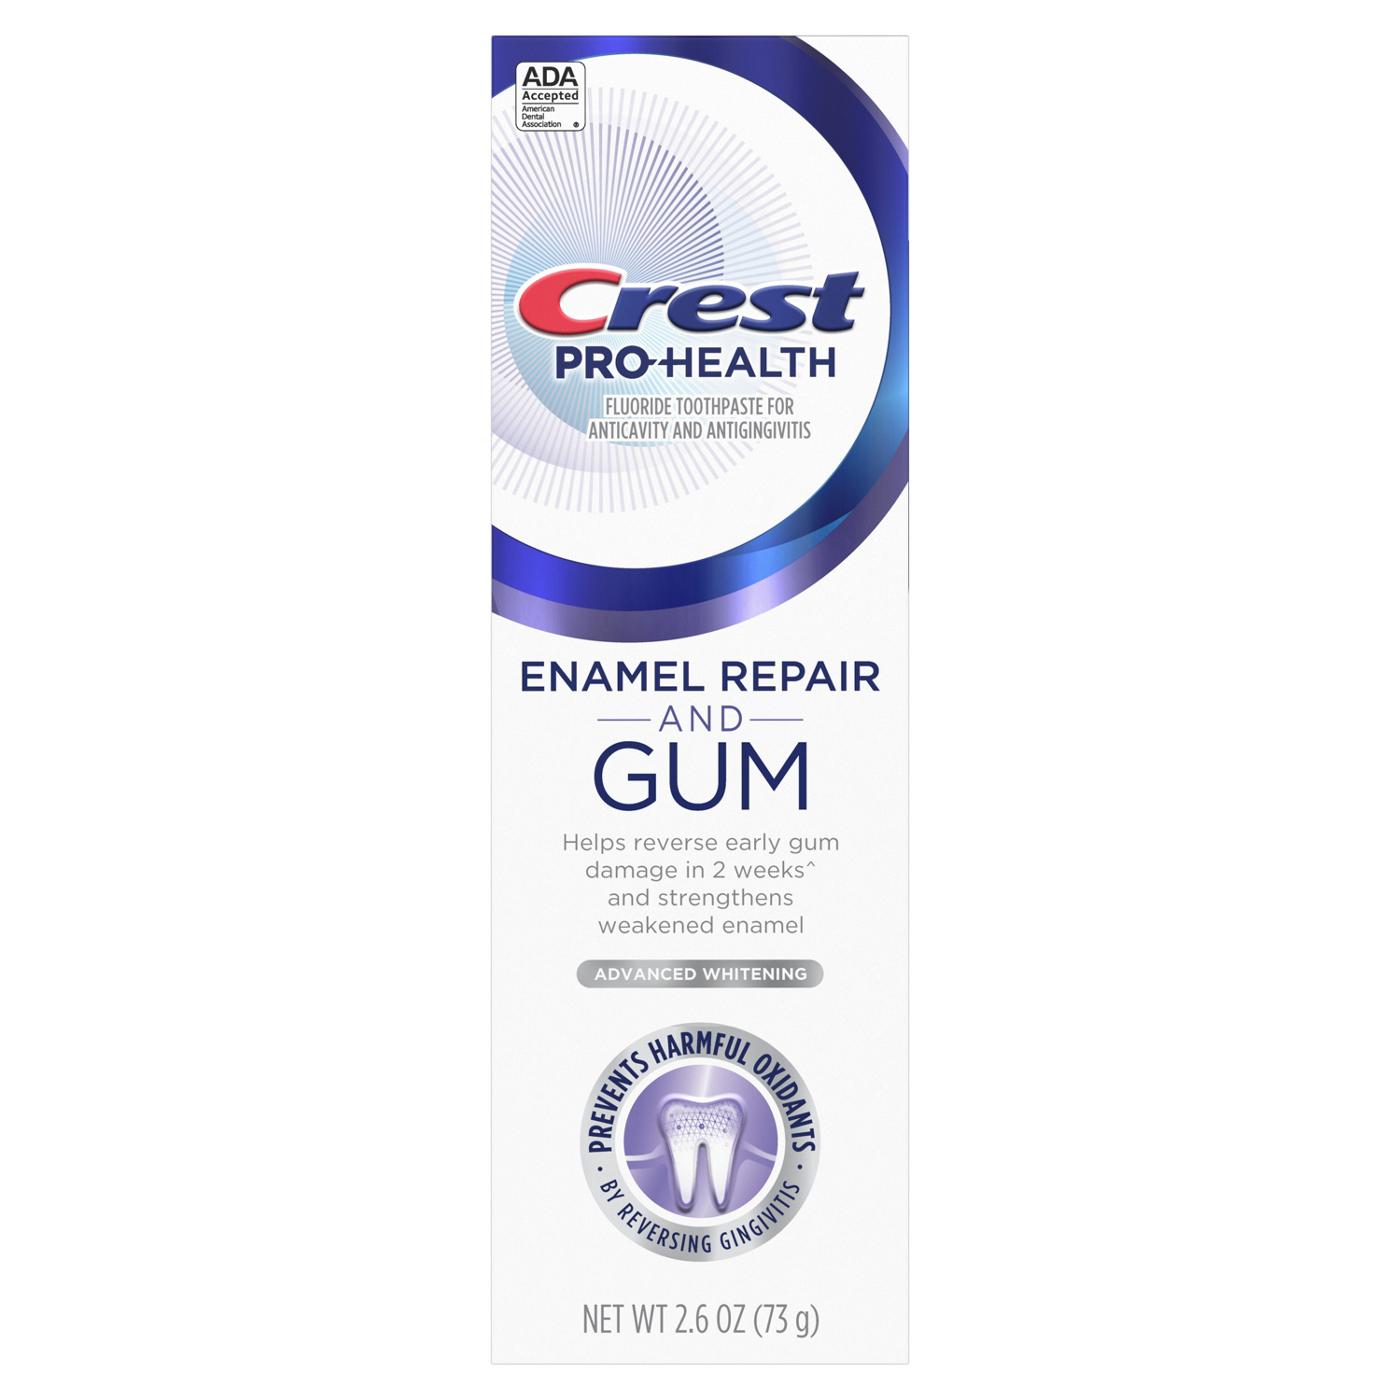 Crest Pro Health Enamel Repair and Gum Toothpaste - Advance Whitening; image 2 of 5